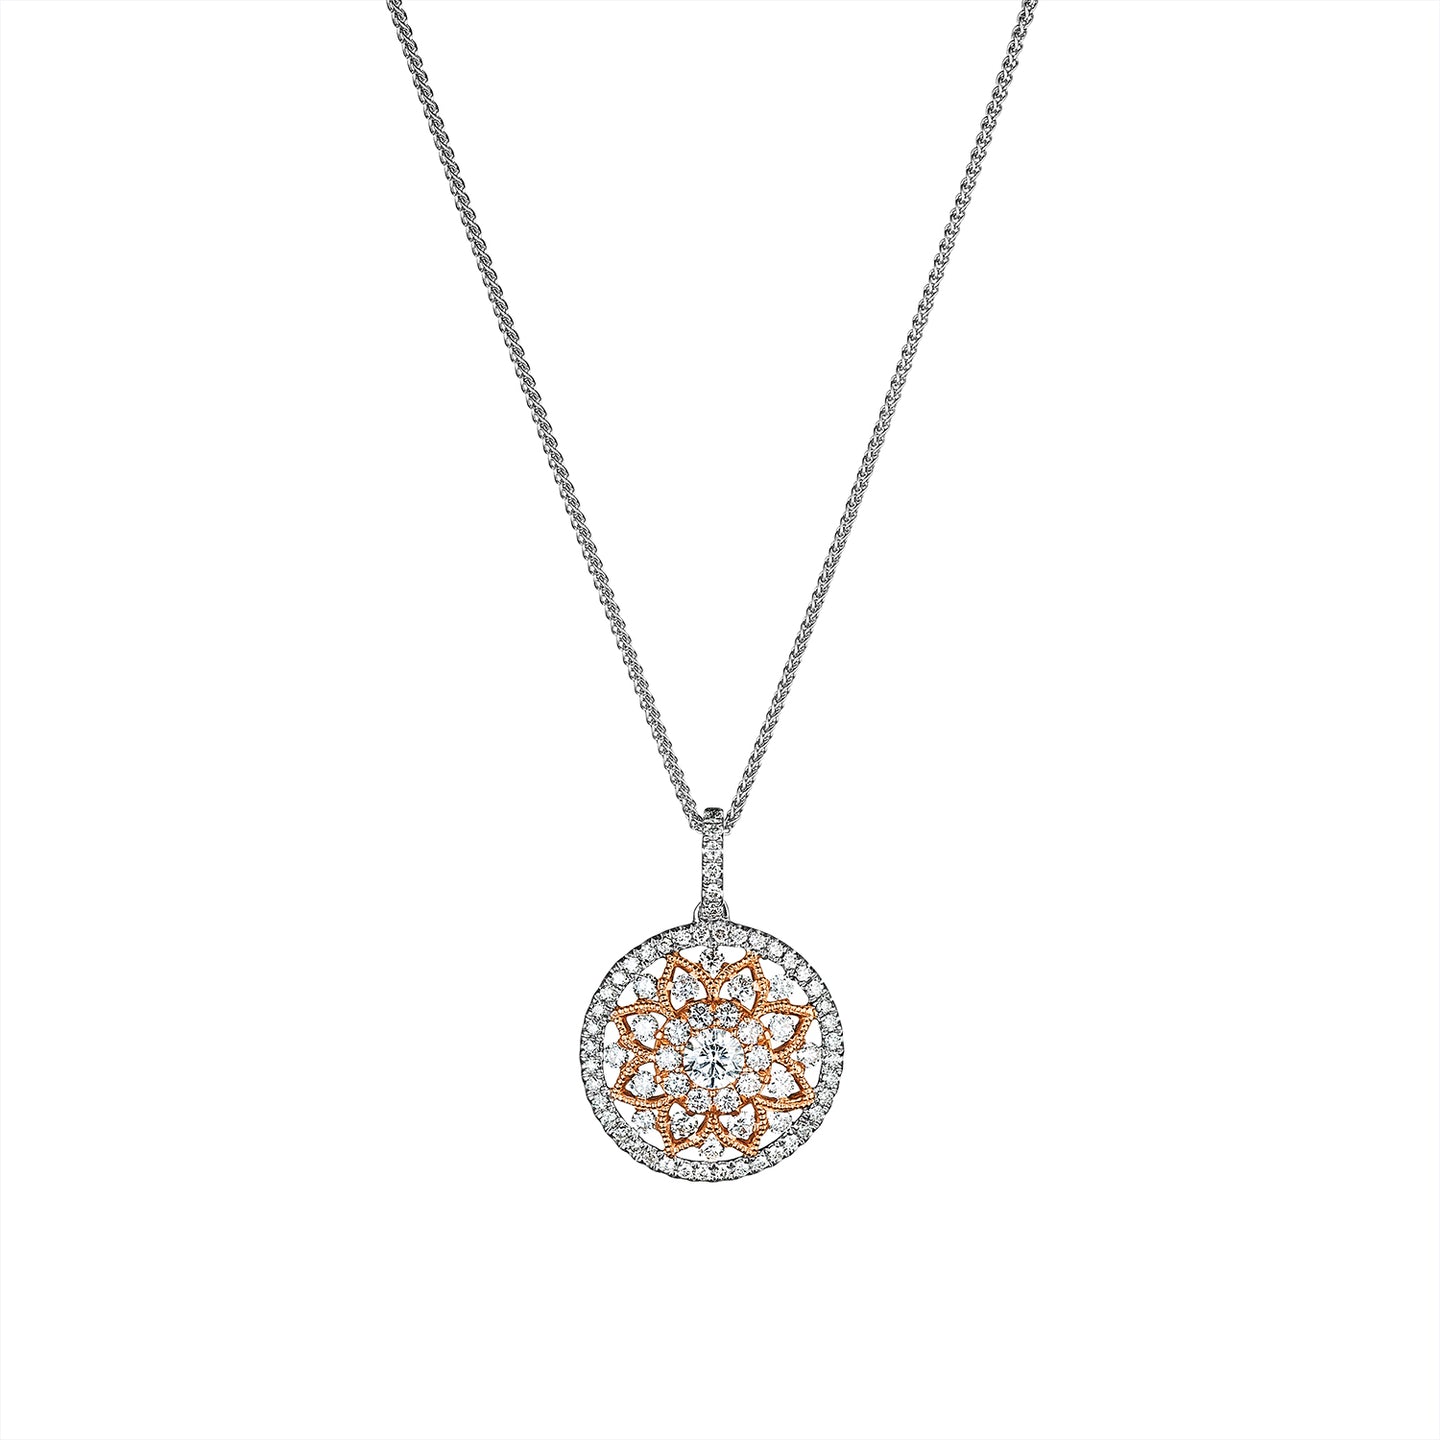 Sabel Collection 14K White and Pink Gold Diamond Filigree Design Pendant Necklace